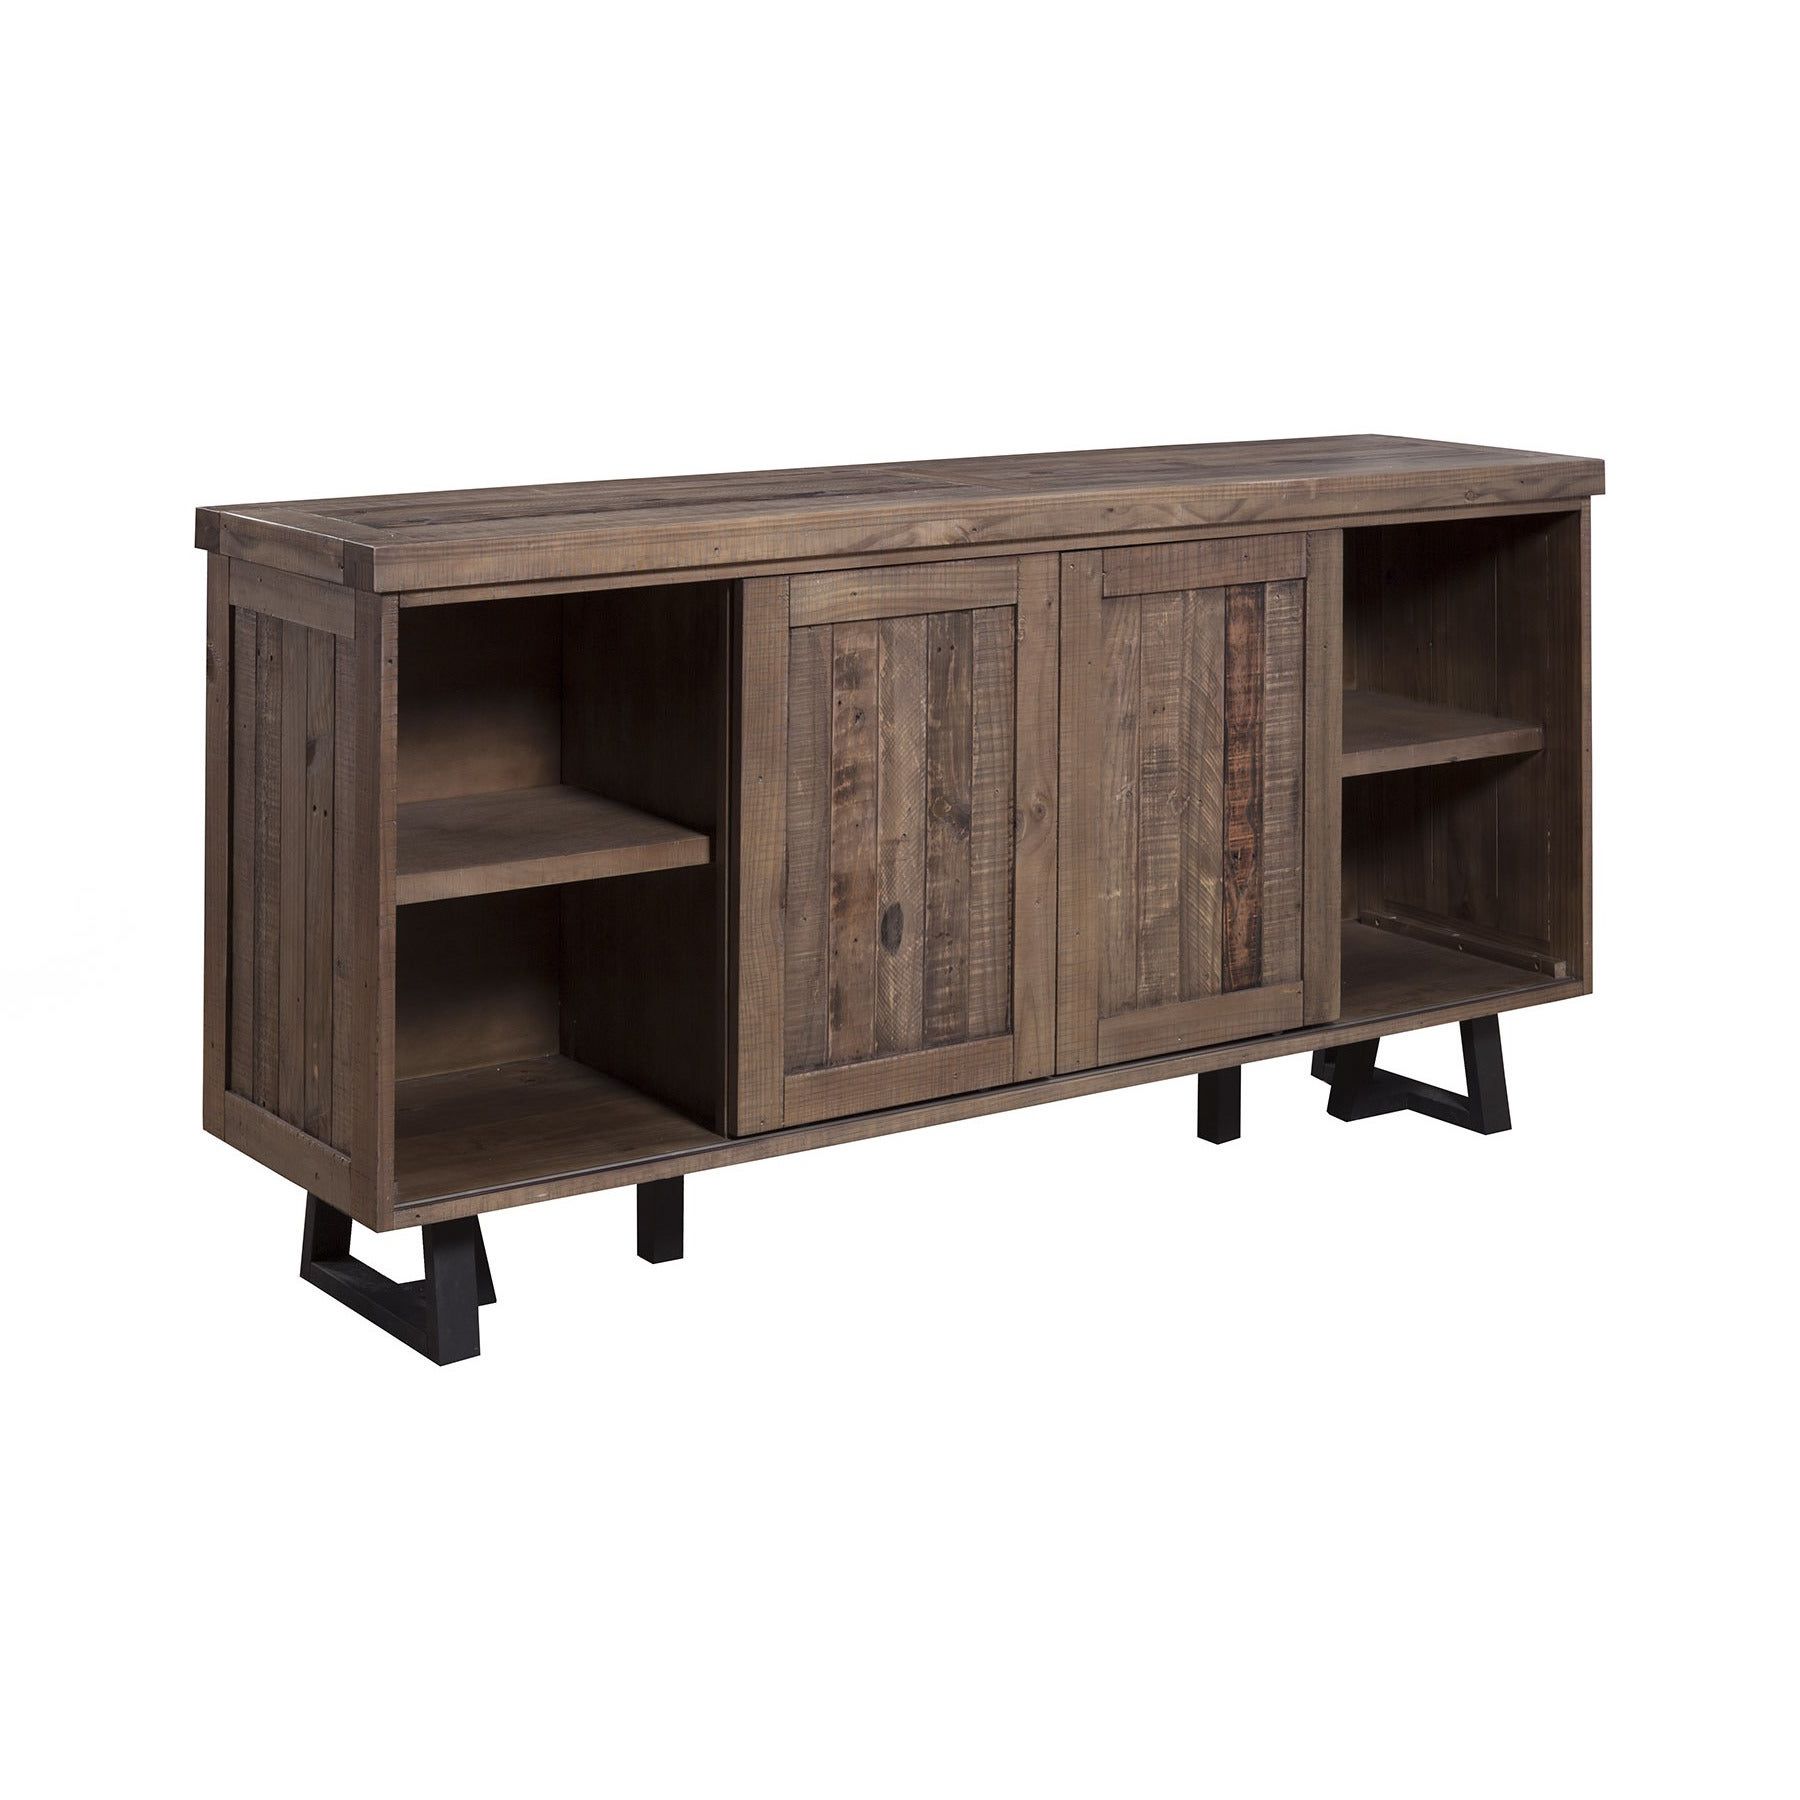 Popular Alpine Prairie Sideboard With Wine Holder With Remington Sideboards (View 17 of 20)